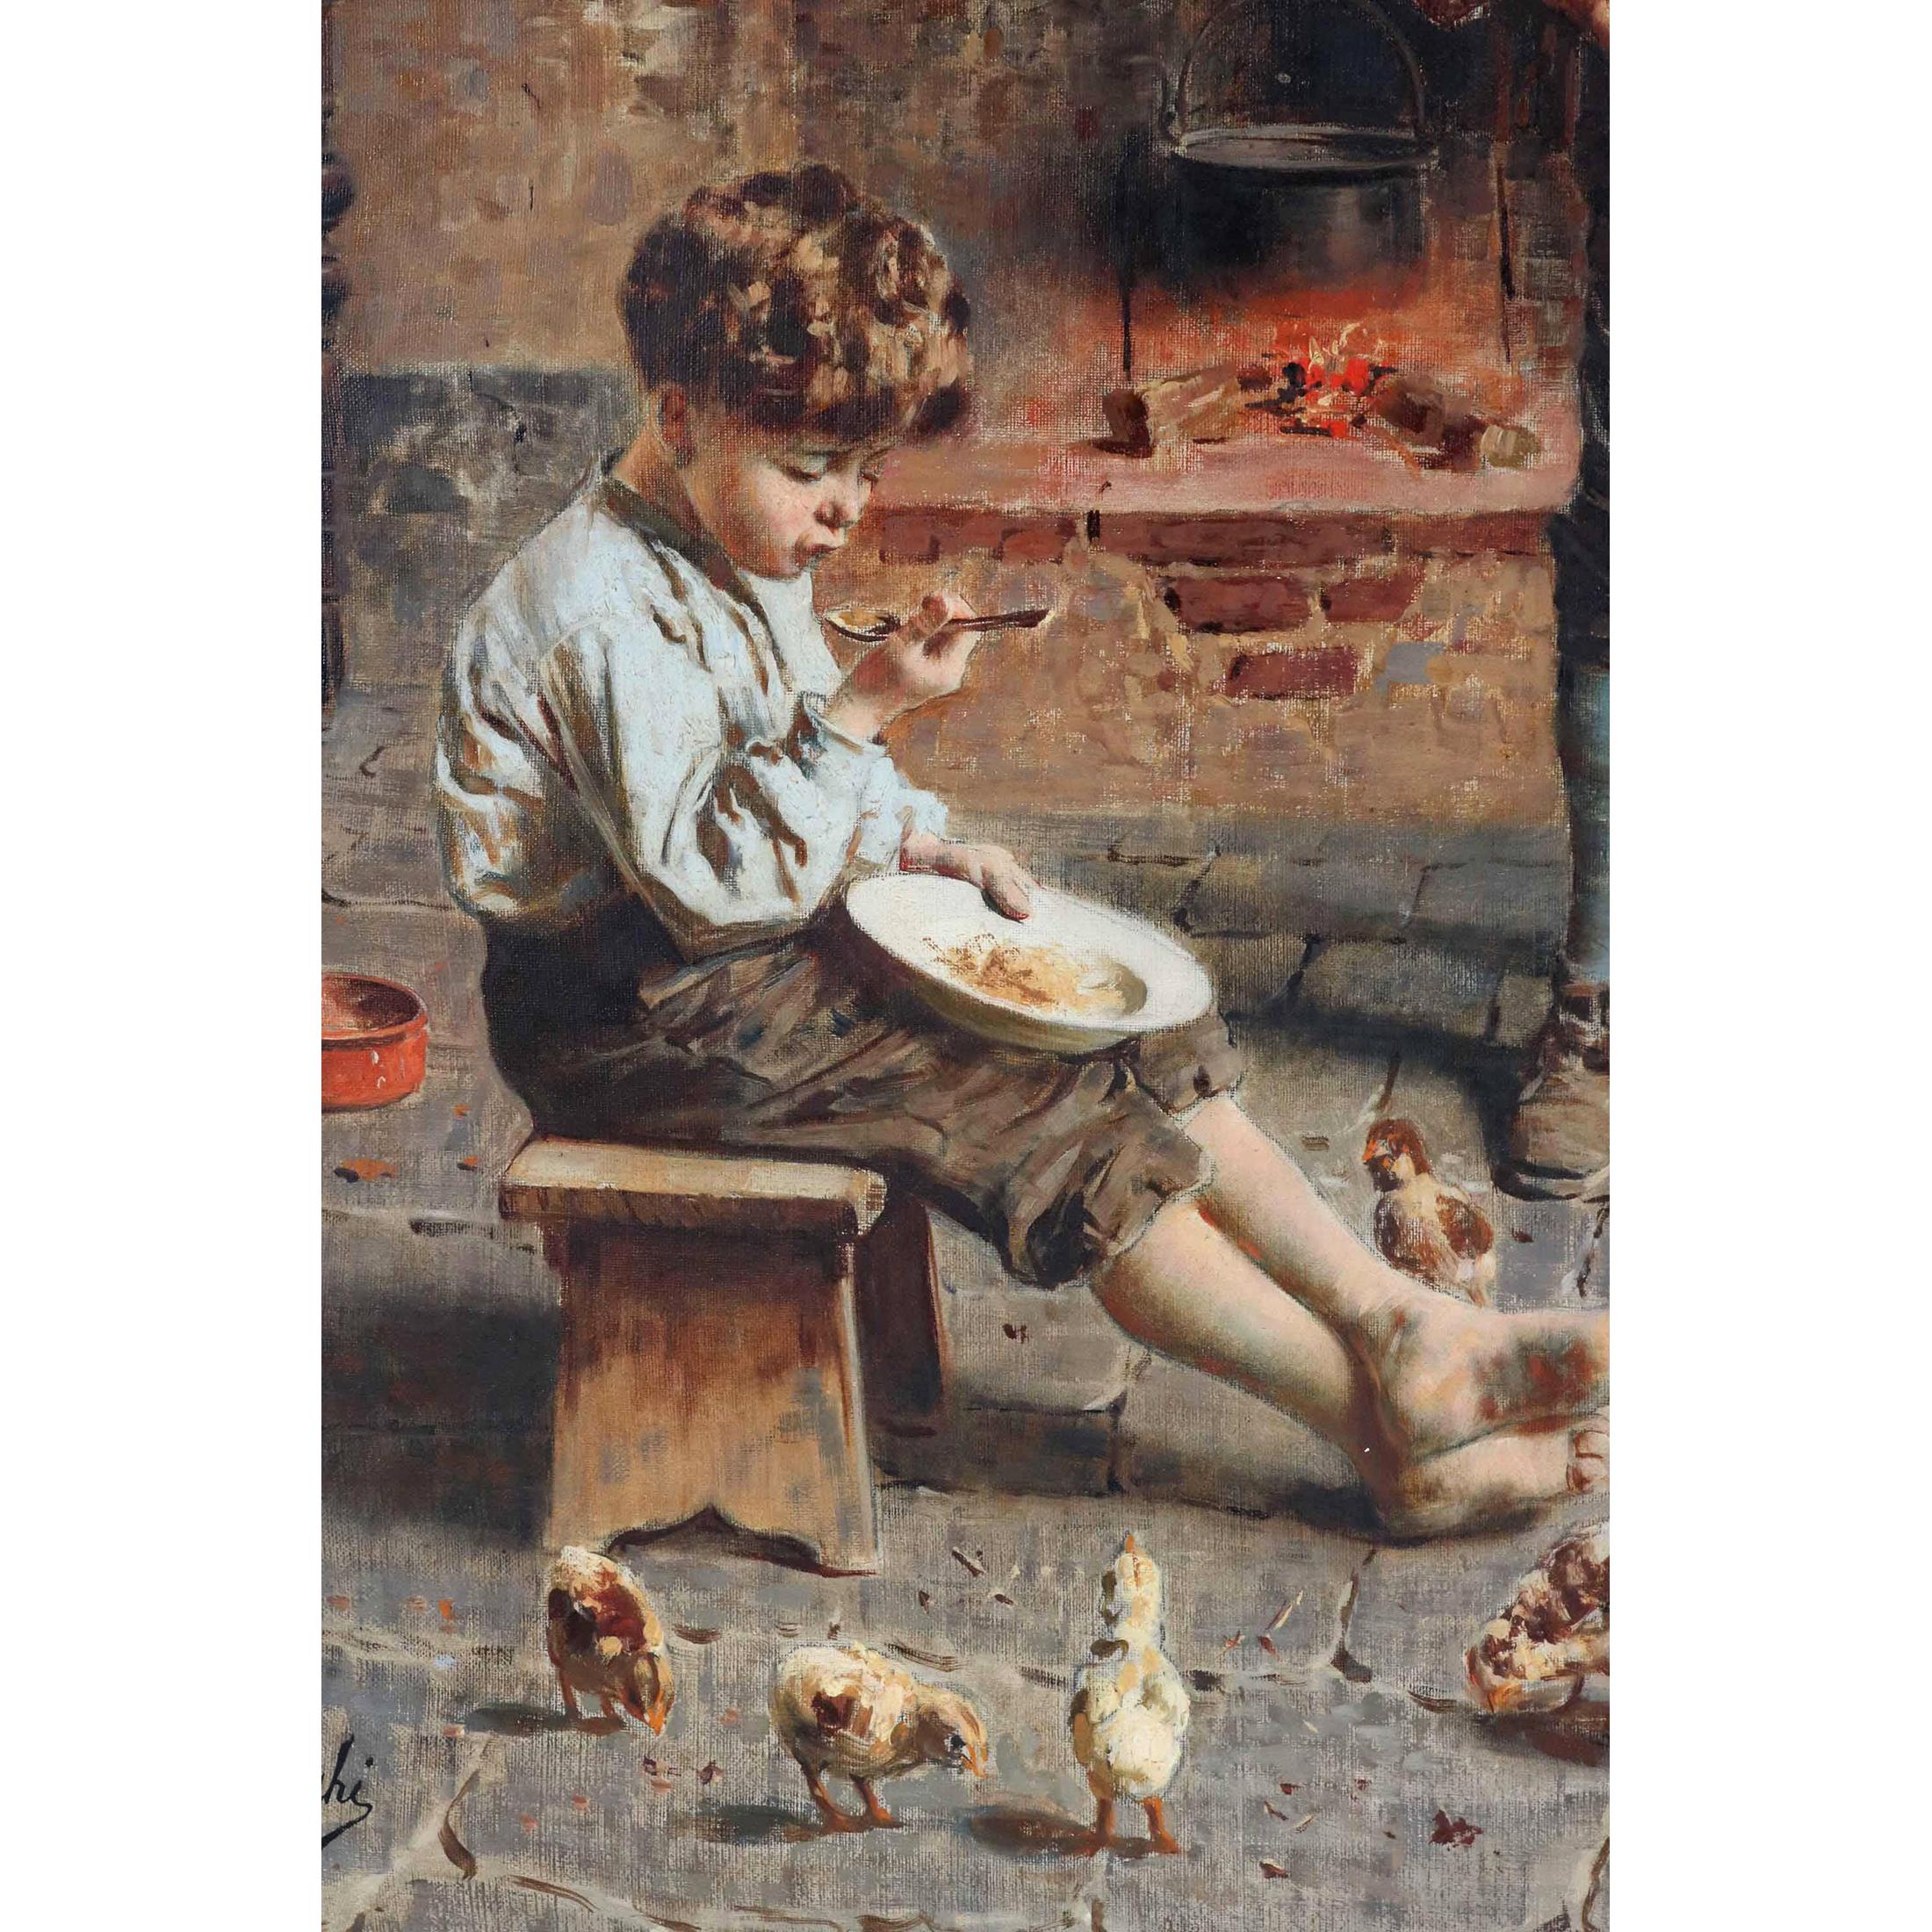 EUGENIO ZAMPIGHI
Italian, 1859-1944

The New Baby 

Signed ‘E Zampighi’  

Oil on canvas
28 1/2 in. x 40 1/2 inches

Born in Modena, Italy, Eugenio Zampighi entered the local Academy of Design at 13. He eventually became one of the most decorated